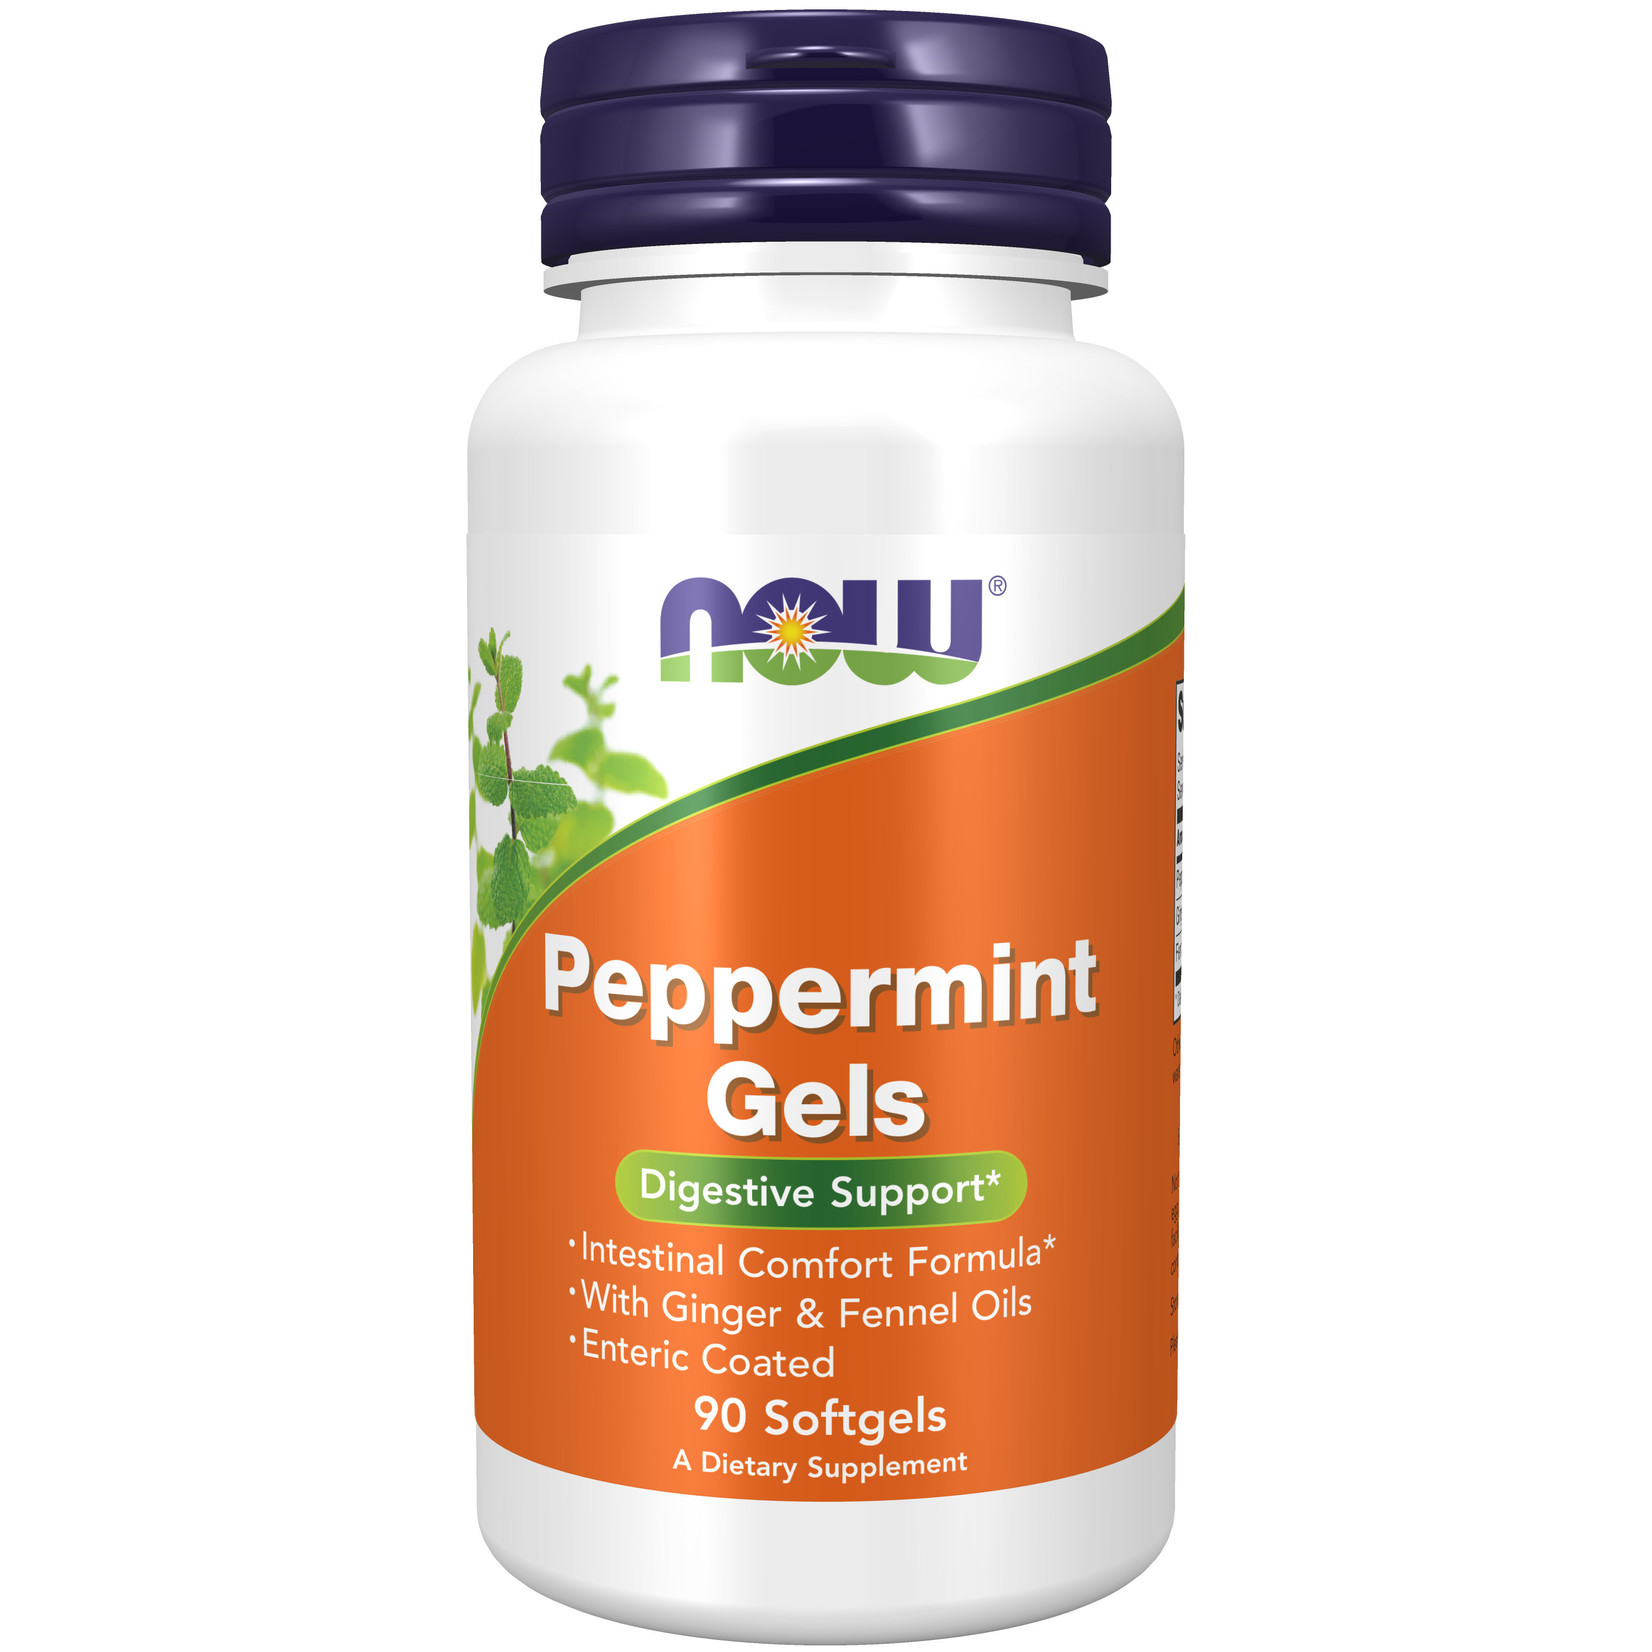 Now Now - Peppermint Gels - 90 Softgels